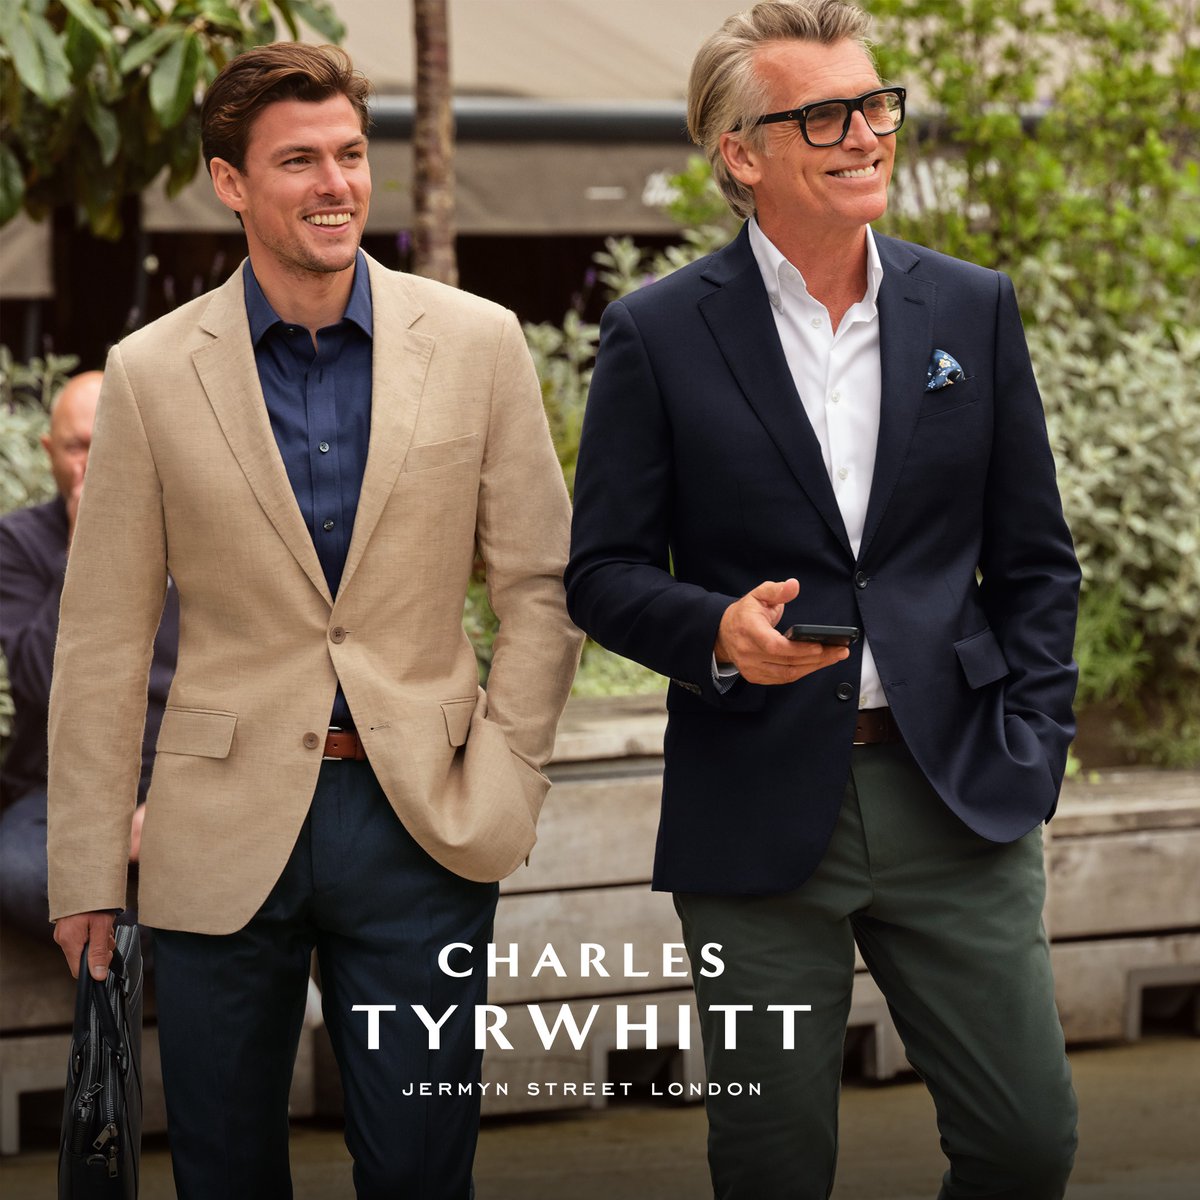 Looking to upgrade your wardrobe? Sovereign members can enjoy preferential rates on a range of new clothes from Charles Tyrwhitt. Log in to the secure customer area and head to Sovereign Perks – SHOPPING to start saving. ow.ly/NFV350GRFxM. T&Cs apply.